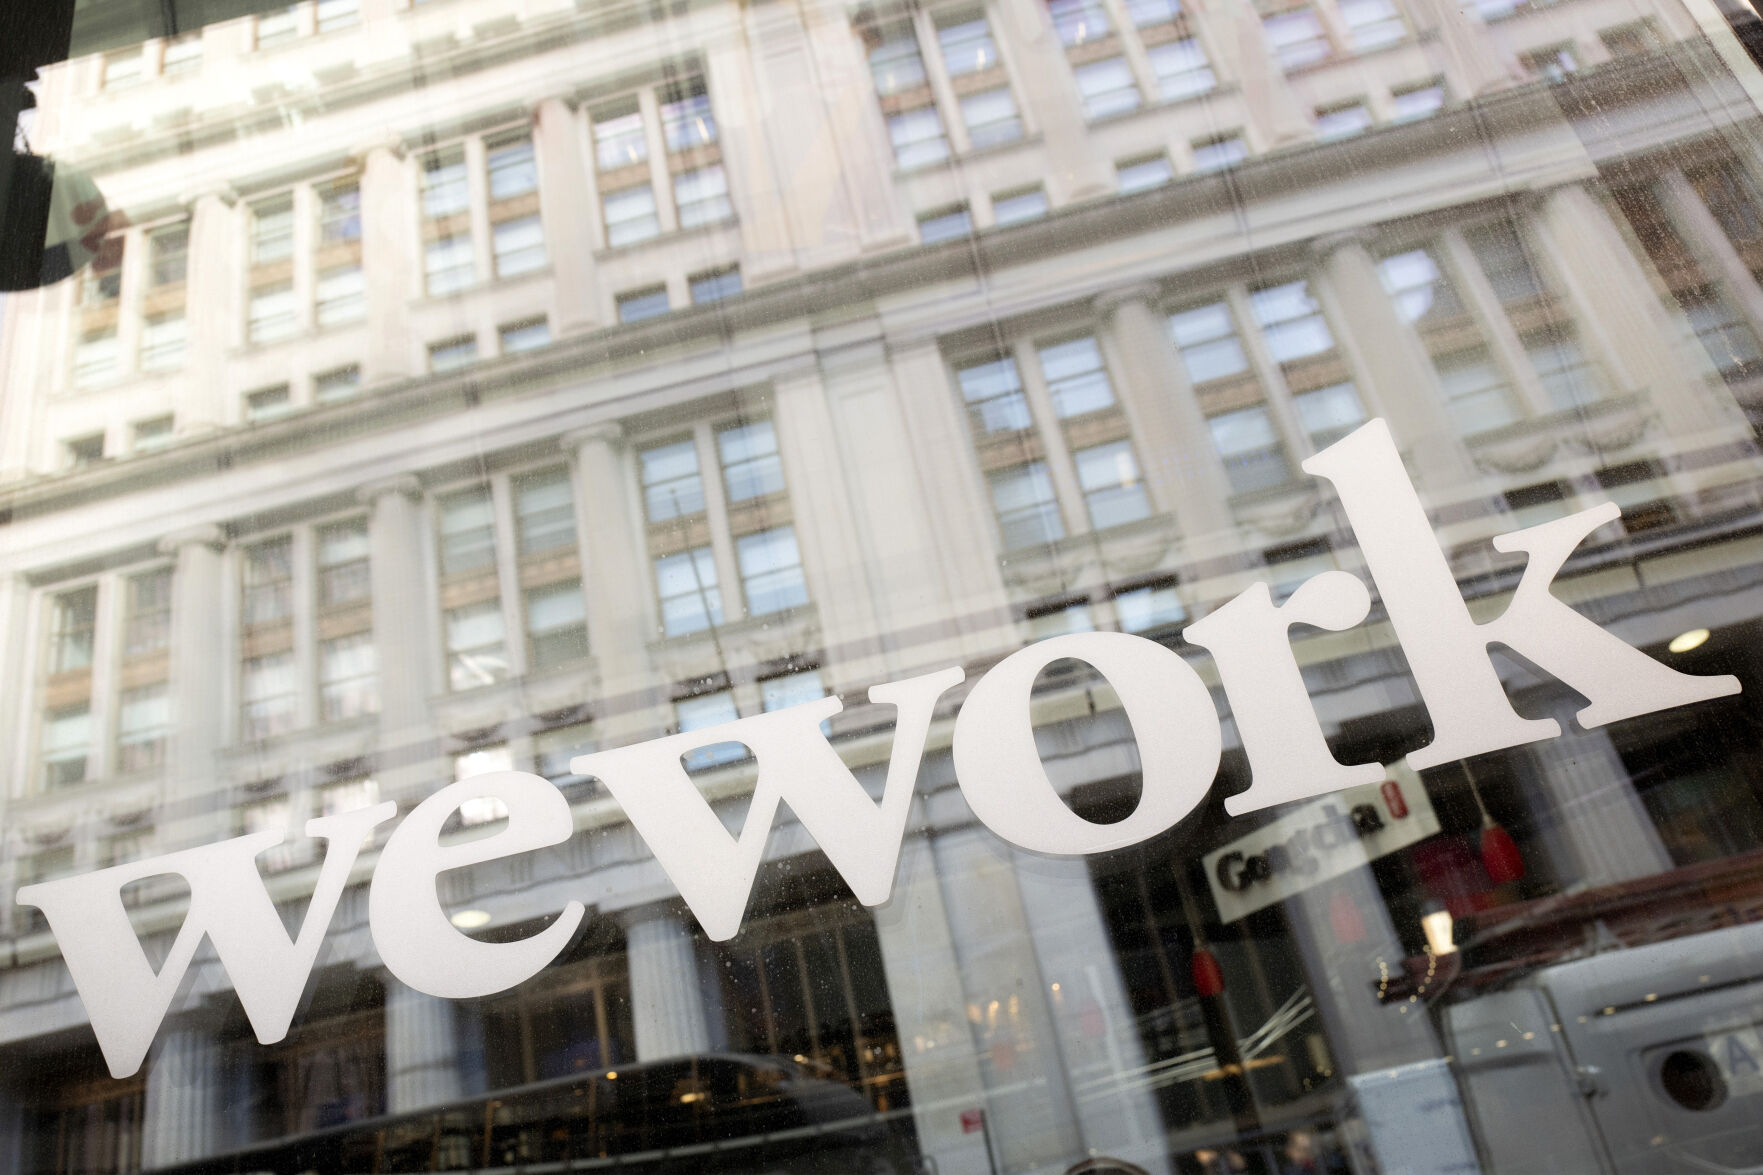 <p>File - WeWork offices are shown, Thursday, Jan. 16, 2020 in New York. WeWork has filed for Chapter 11 bankruptcy protection, marking a stunning fall for the office sharing company once seen as a Wall Street darling that promised to upend the way people went to work around the world. (AP Photo/Mark Lennihan, File)</p>   PHOTO CREDIT: Mark Lennihan